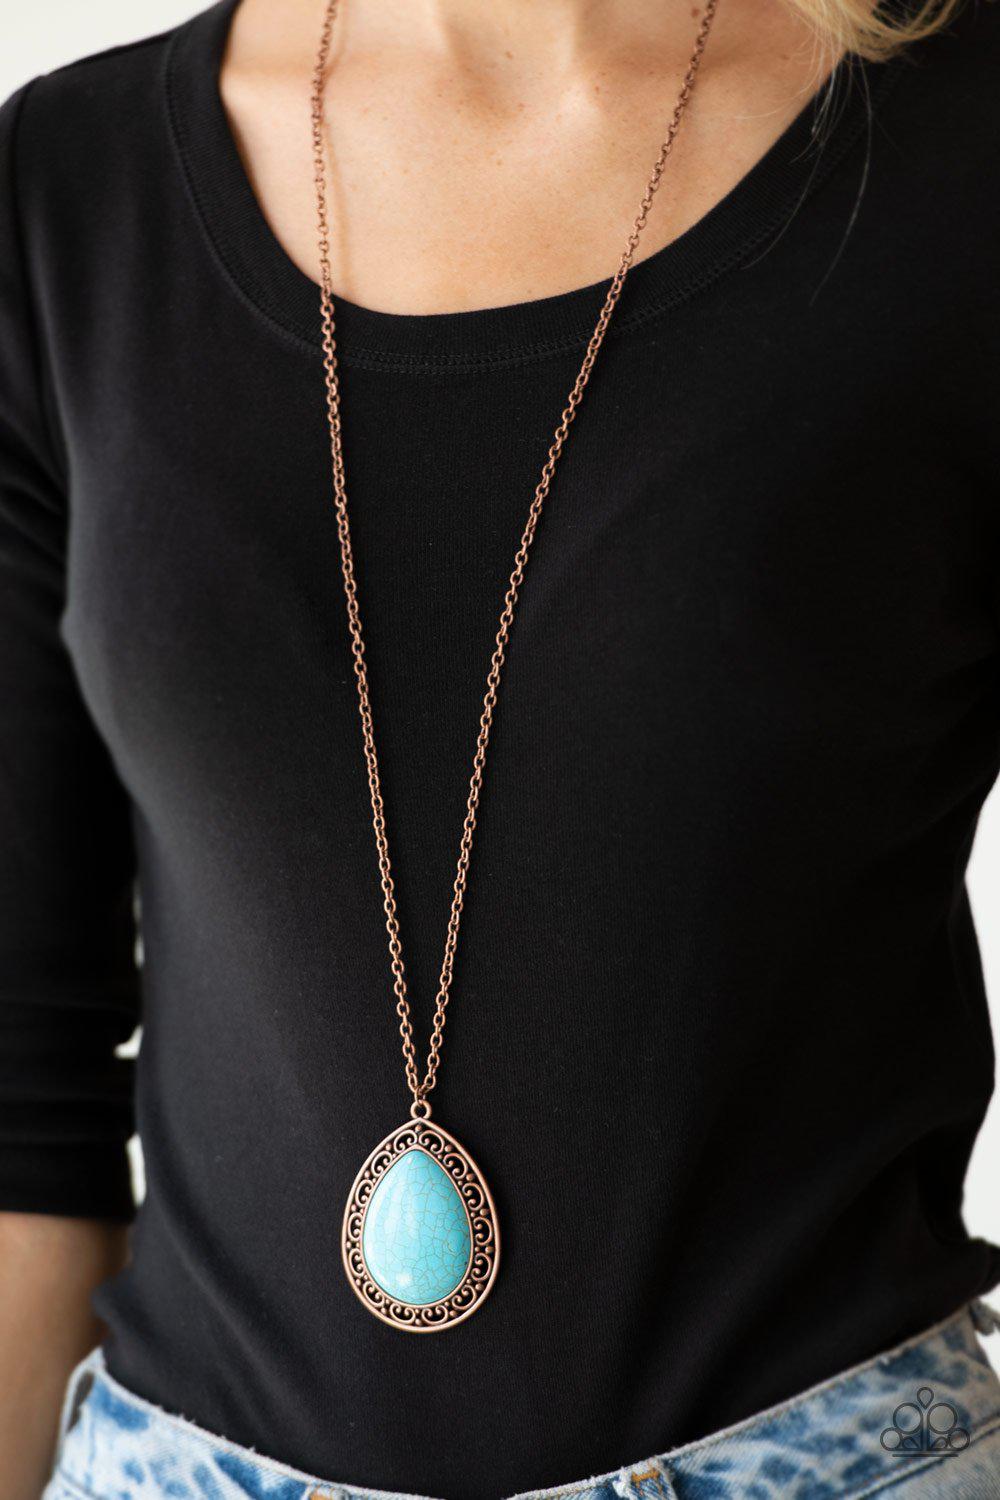 Full Frontier Copper and Turquoise Blue Stone Teardrop Necklace - Paparazzi Accessories- model - CarasShop.com - $5 Jewelry by Cara Jewels